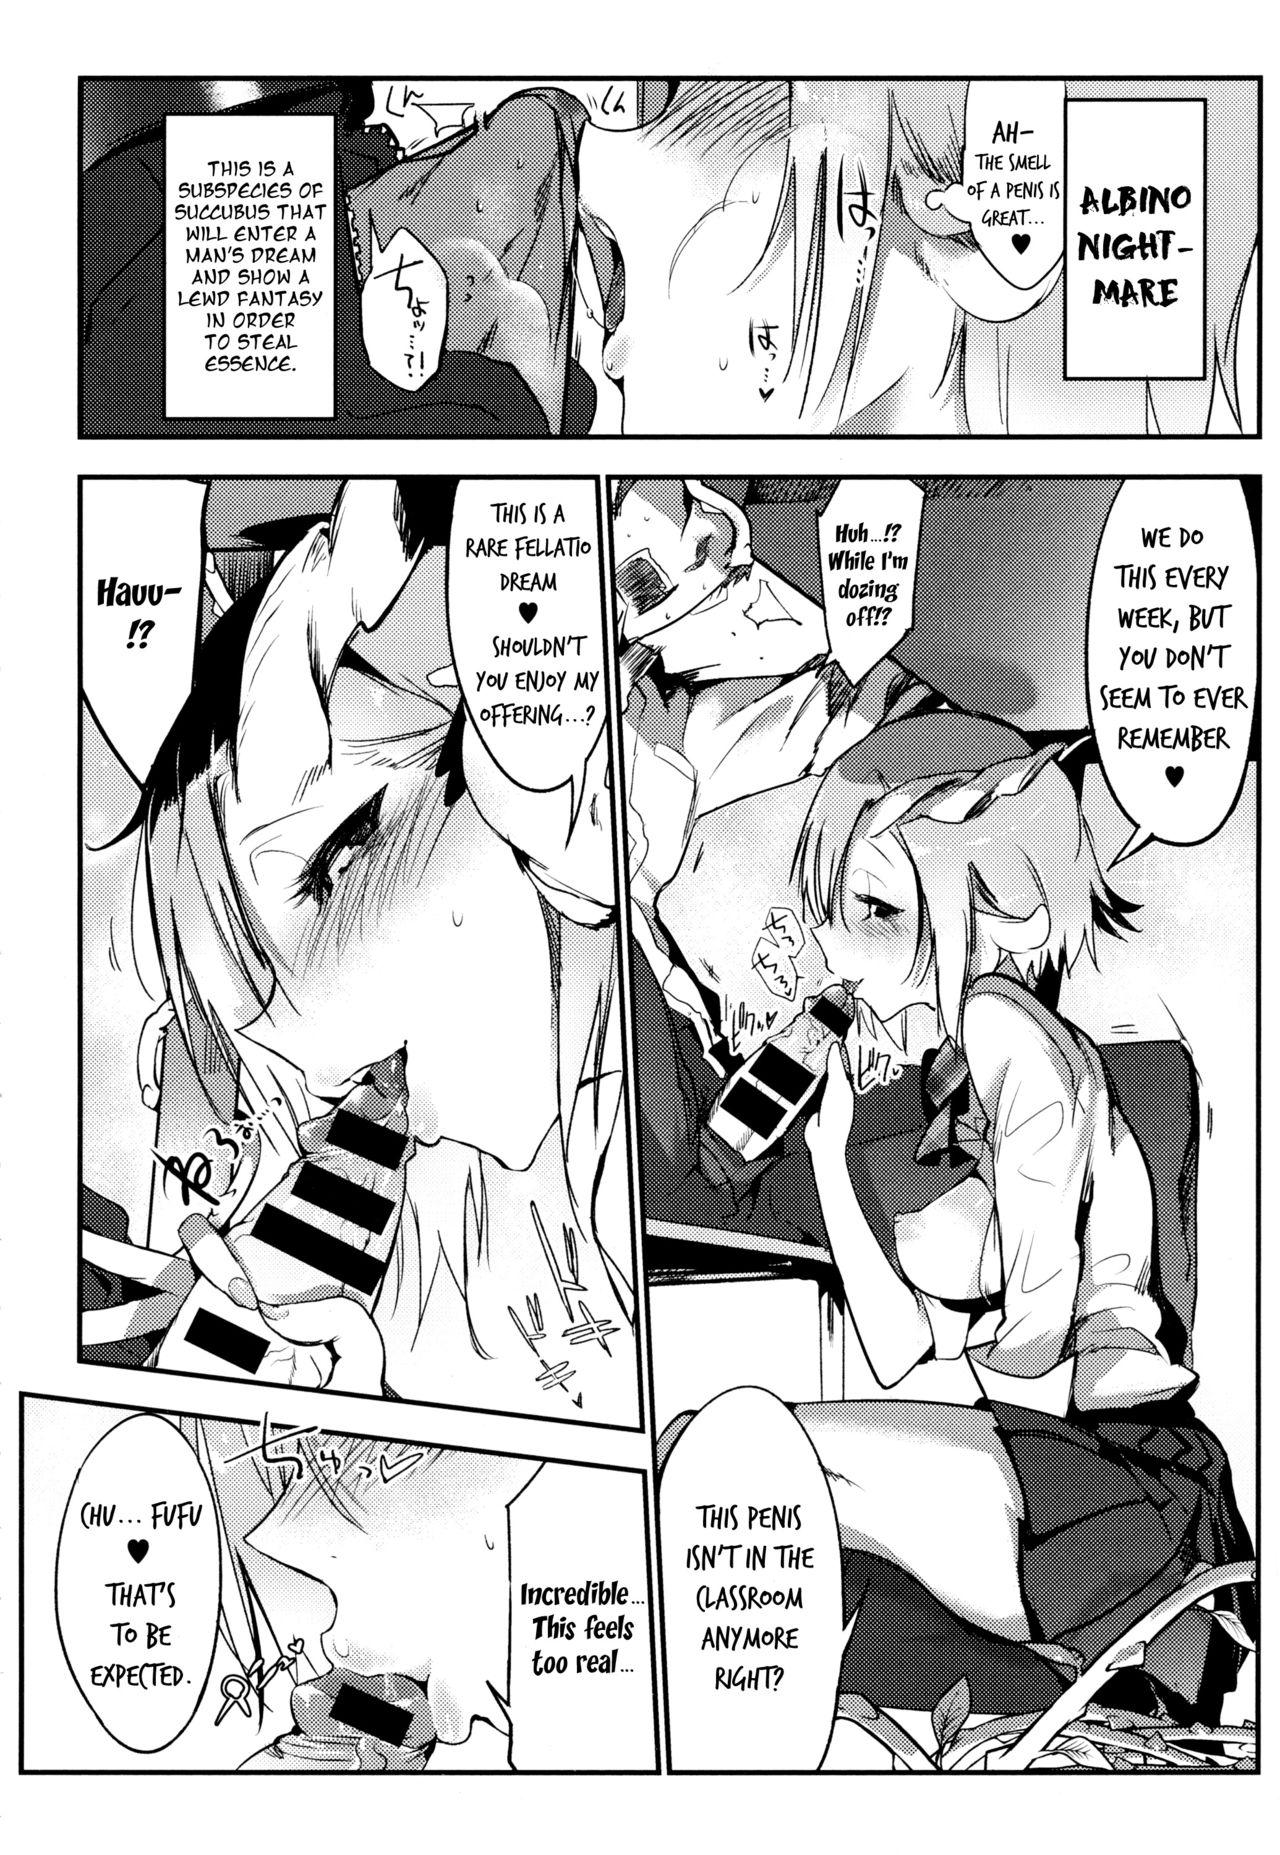 Cunt white night Hot Blow Jobs - Page 2